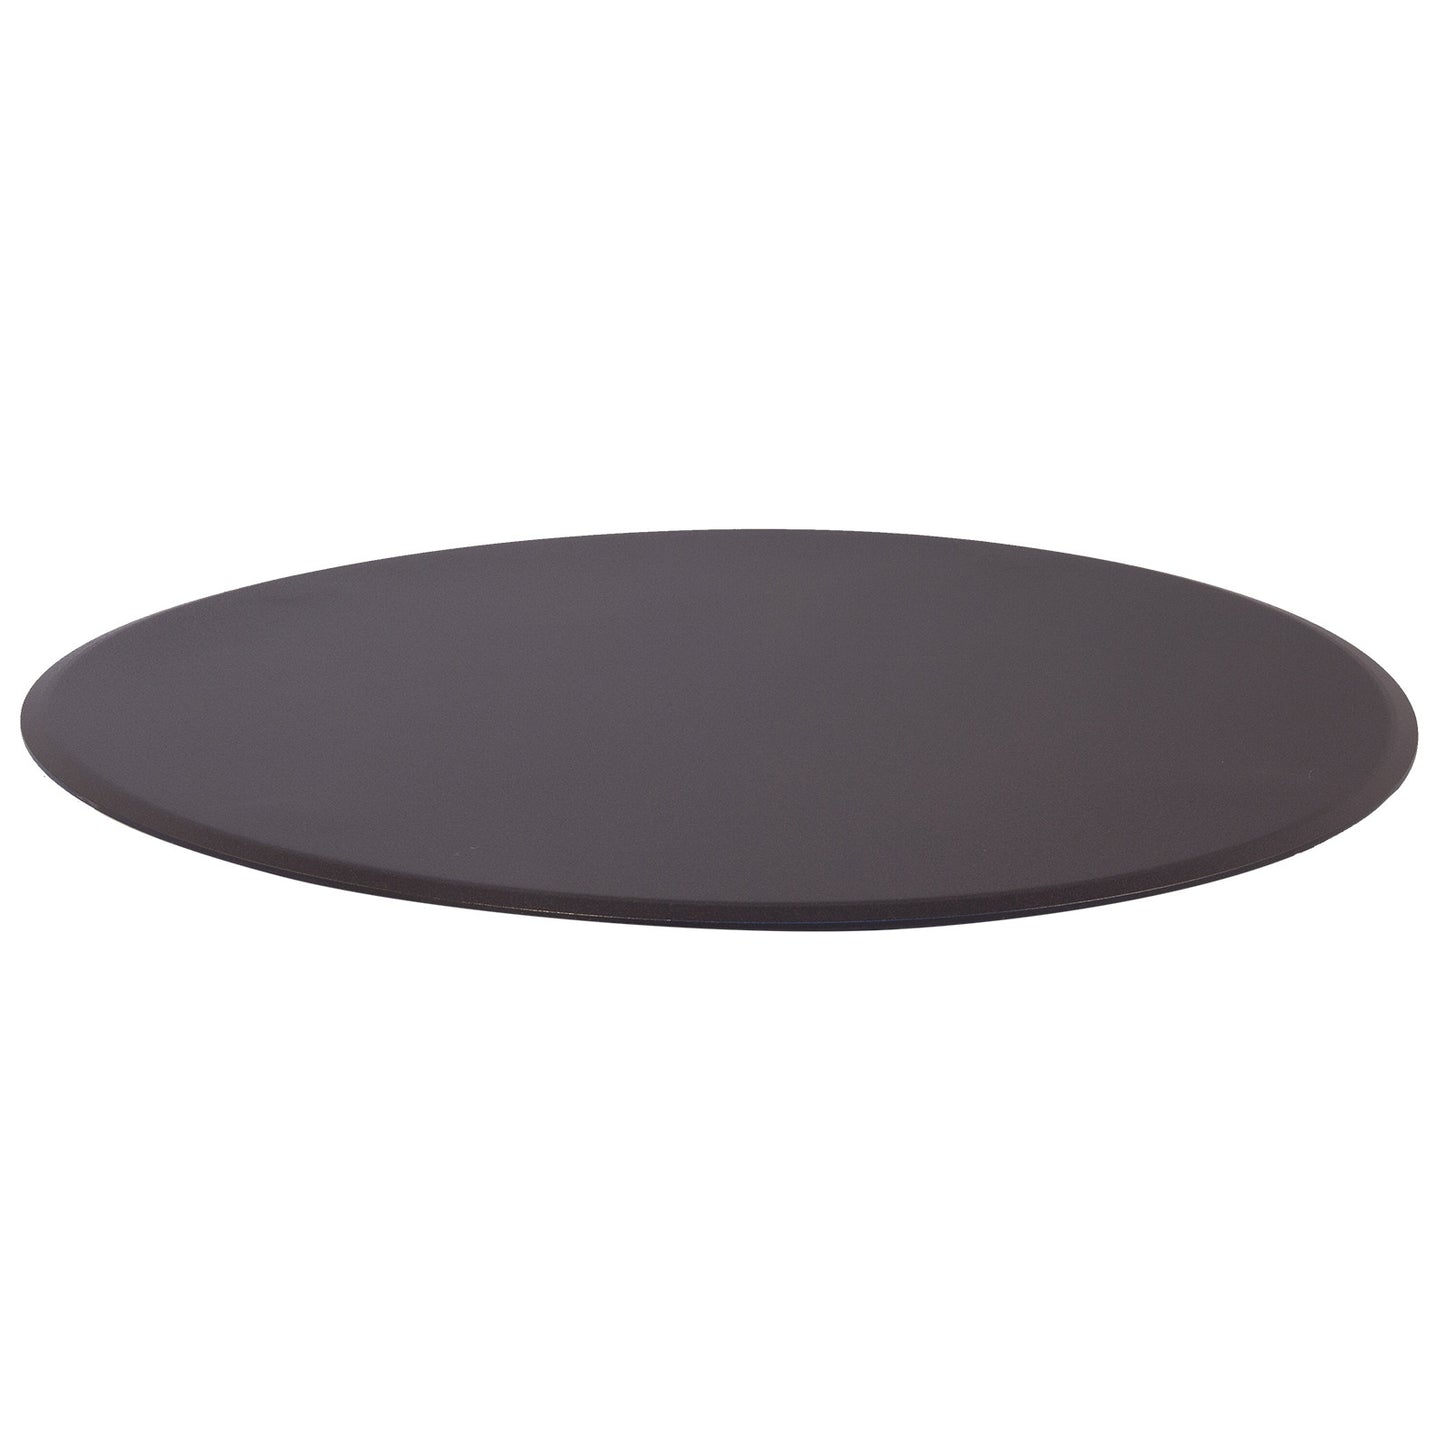 O.W. Lee Small Round Fire Pit Flat Cover is available at Jacobs Custom Living.